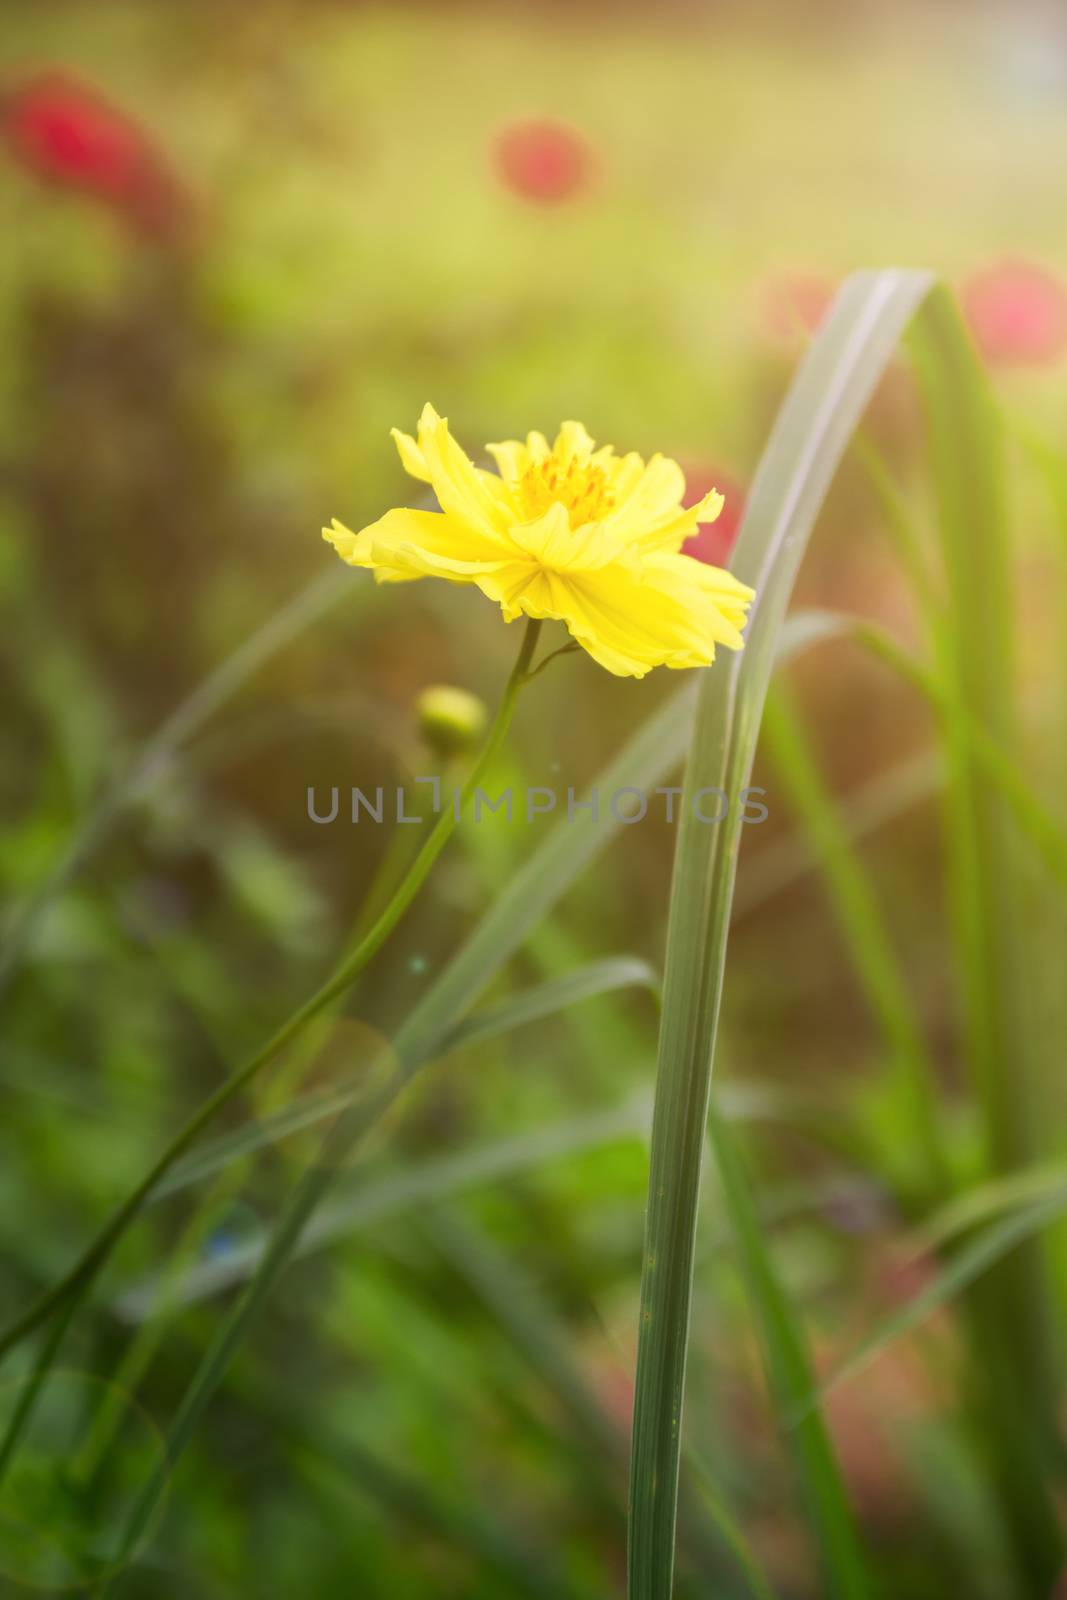 Small yellow flowers on the delicate background, macro of yellow flowers, spring background with beautiful yellow flowers